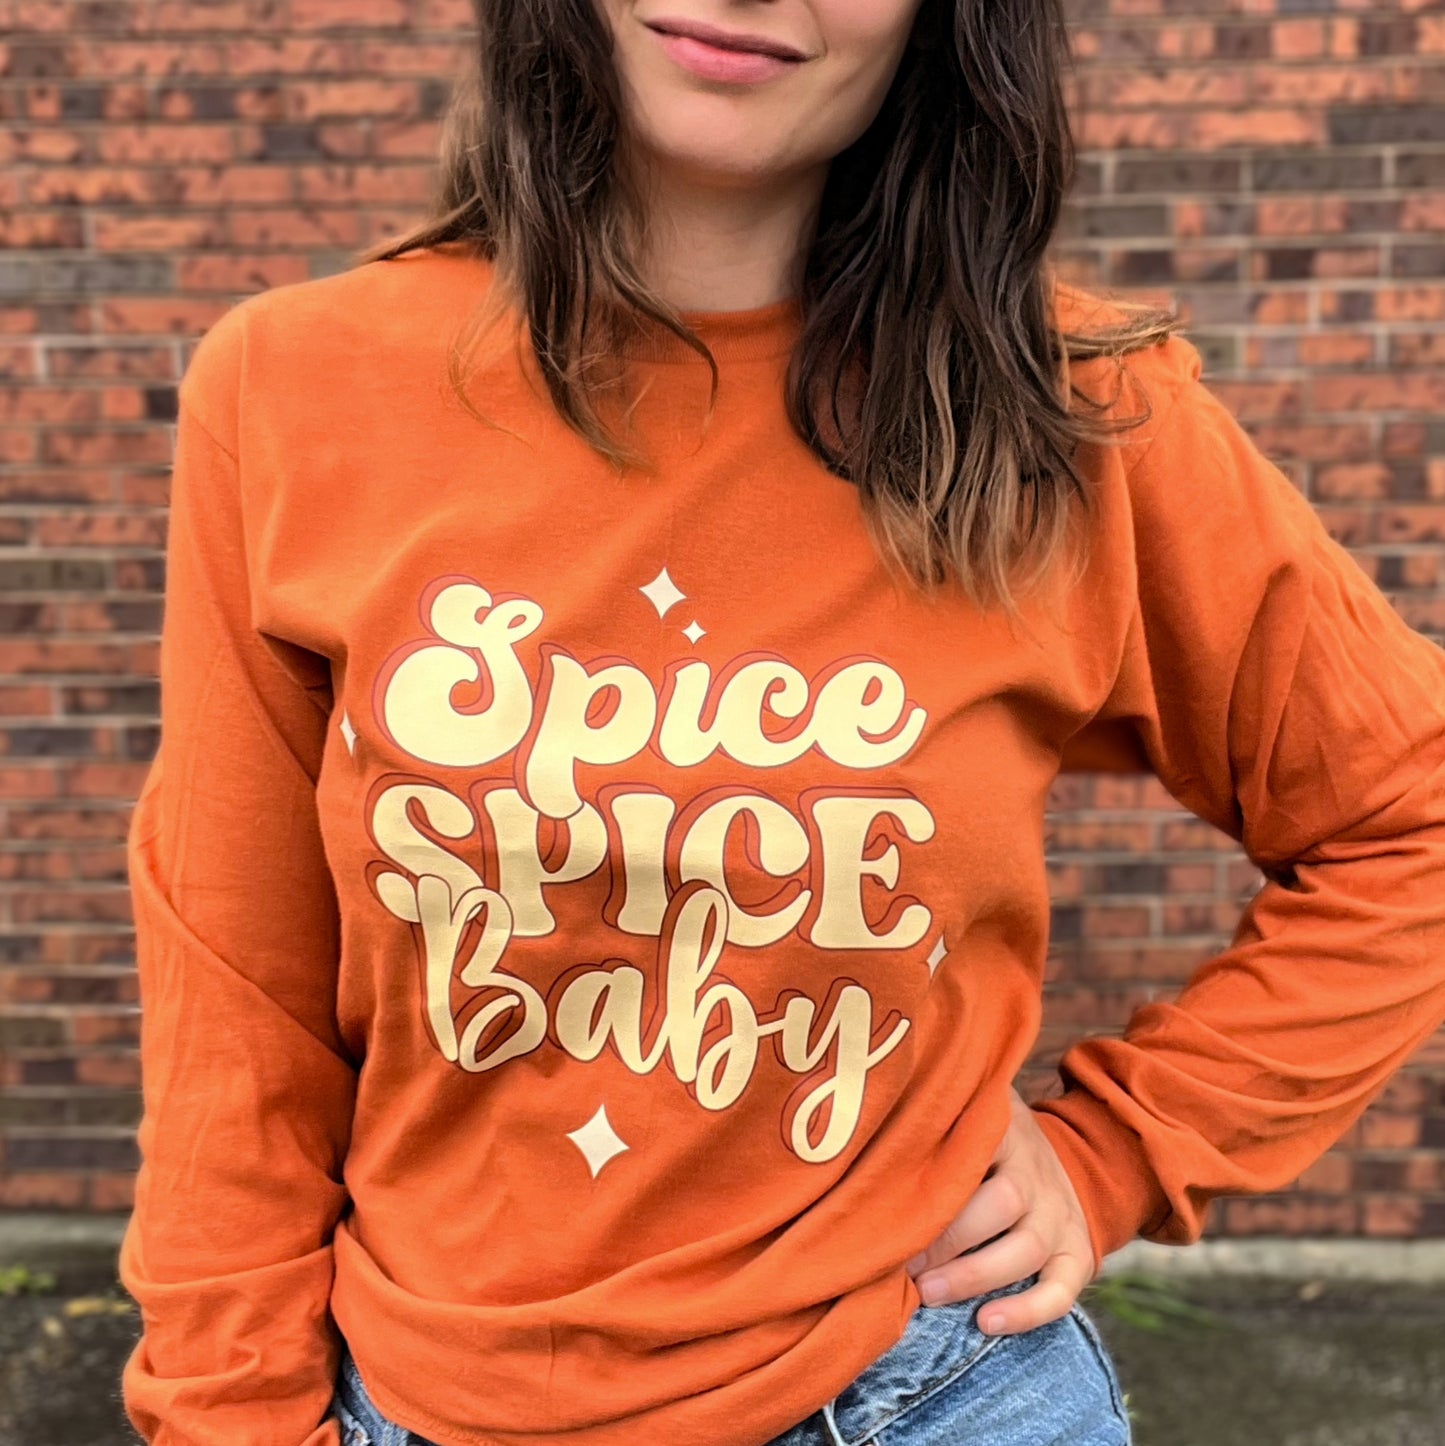 SPICE SPICE BABY longsleeve unisexe - tamelo boutique